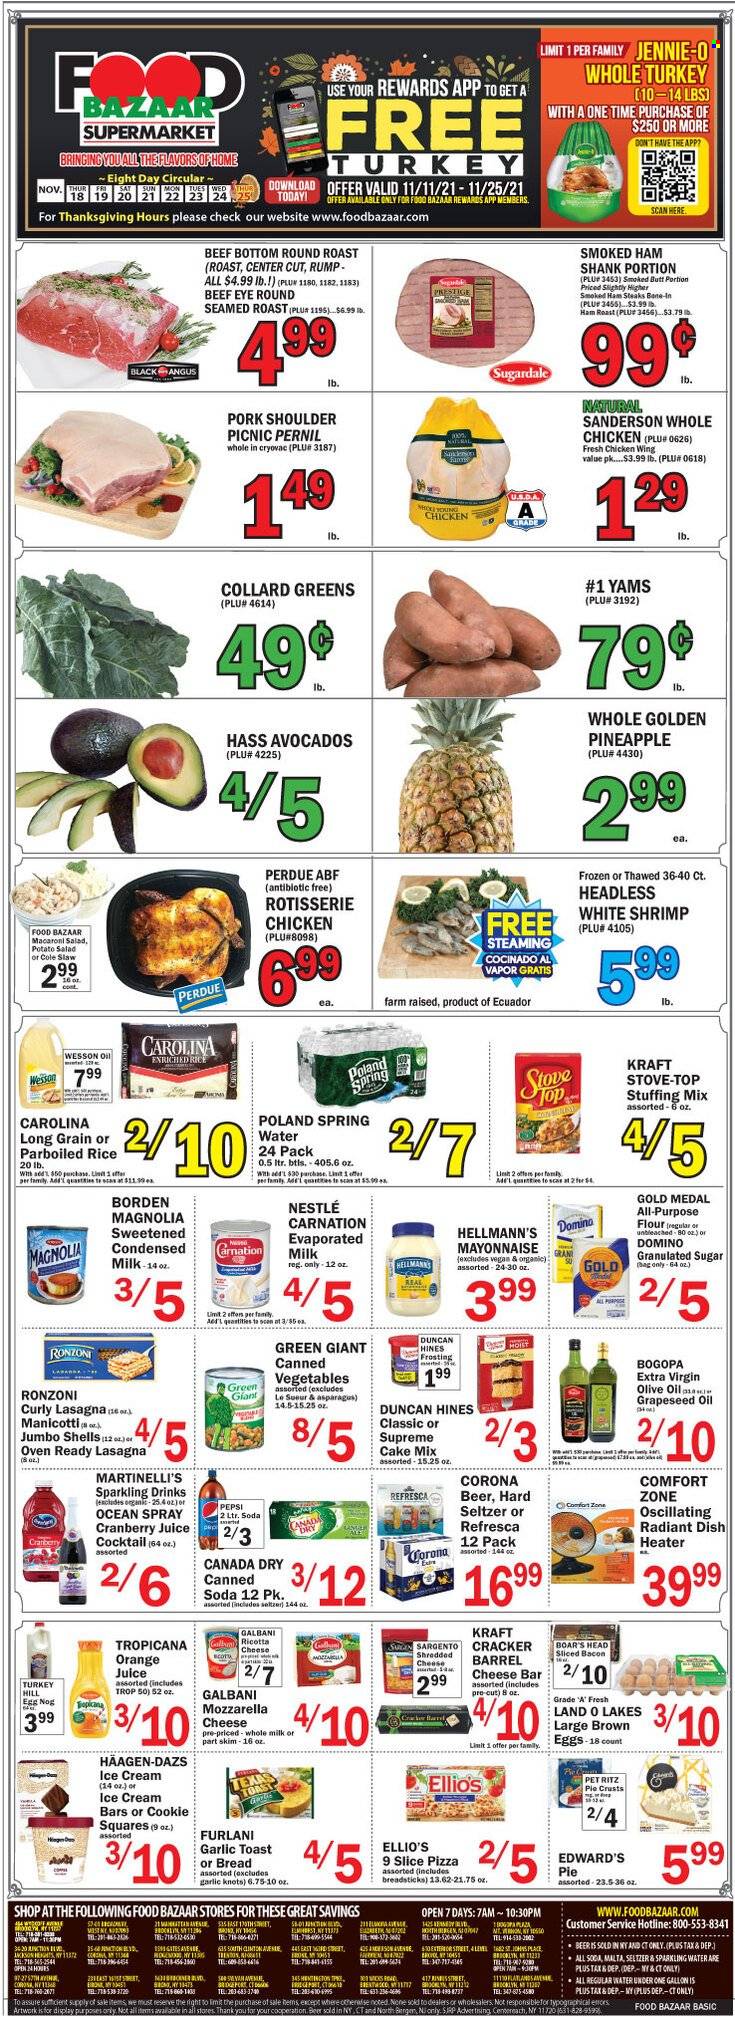 thumbnail - Food Bazaar Flyer - 11/18/2021 - 11/25/2021 - Sales products - toast bread, cake mix, pie crust, coleslaw, collard greens, avocado, shrimps, pizza, chicken roast, pasta, lasagna meal, Perdue®, macaroni salad, Kraft®, pasta salad, Sugardale, roast, Boar's Head, ready meal, ham shank, smoked ham, potato salad, ham steaks, ricotta, shredded cheese, Galbani, Sargento, evaporated milk, condensed milk, large eggs, mayonnaise, Hellmann’s, ice cream, ice cream bars, Häagen-Dazs, Nestlé, RITZ, bread sticks, frosting, granulated sugar, stuffing mix, sugar, baking mix, canned vegetables, rice, parboiled rice, extra virgin olive oil, olive oil, oil, grape seed oil, Canada Dry, cranberry juice, ginger ale, Pepsi, orange juice, fruit drink, soft drink, spring water, soda, sparkling water, water, carbonated soft drink, eggnog, Hard Seltzer, beer, Corona Extra, whole chicken, whole turkey, beef meat, steak, eye of round, round roast, pork meat, pork shoulder. Page 1.